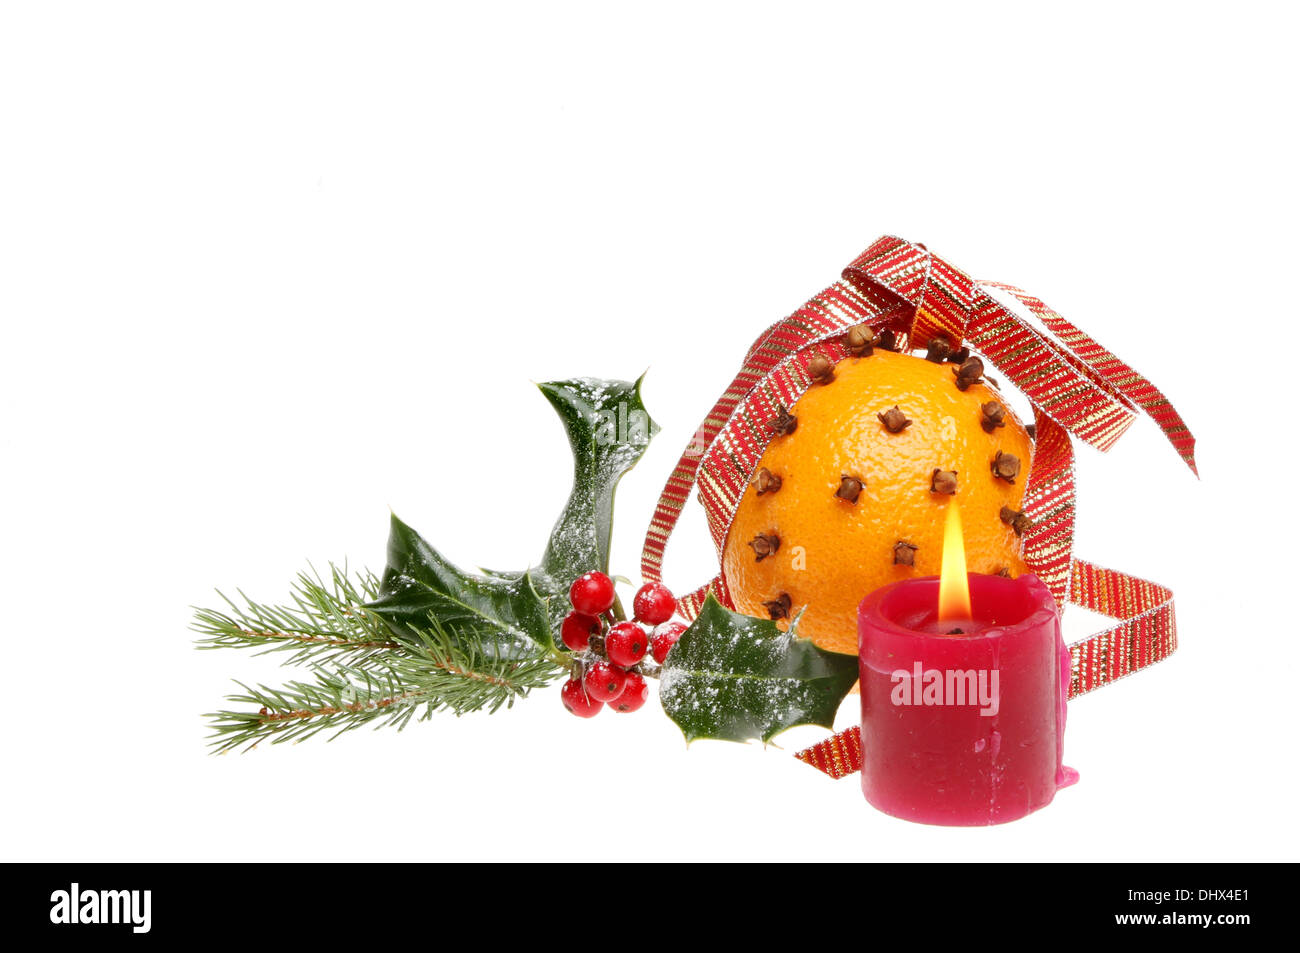 Christmas decoration of clove decorated orange, holly and pine needles and a burning red candle isolated against white Stock Photo